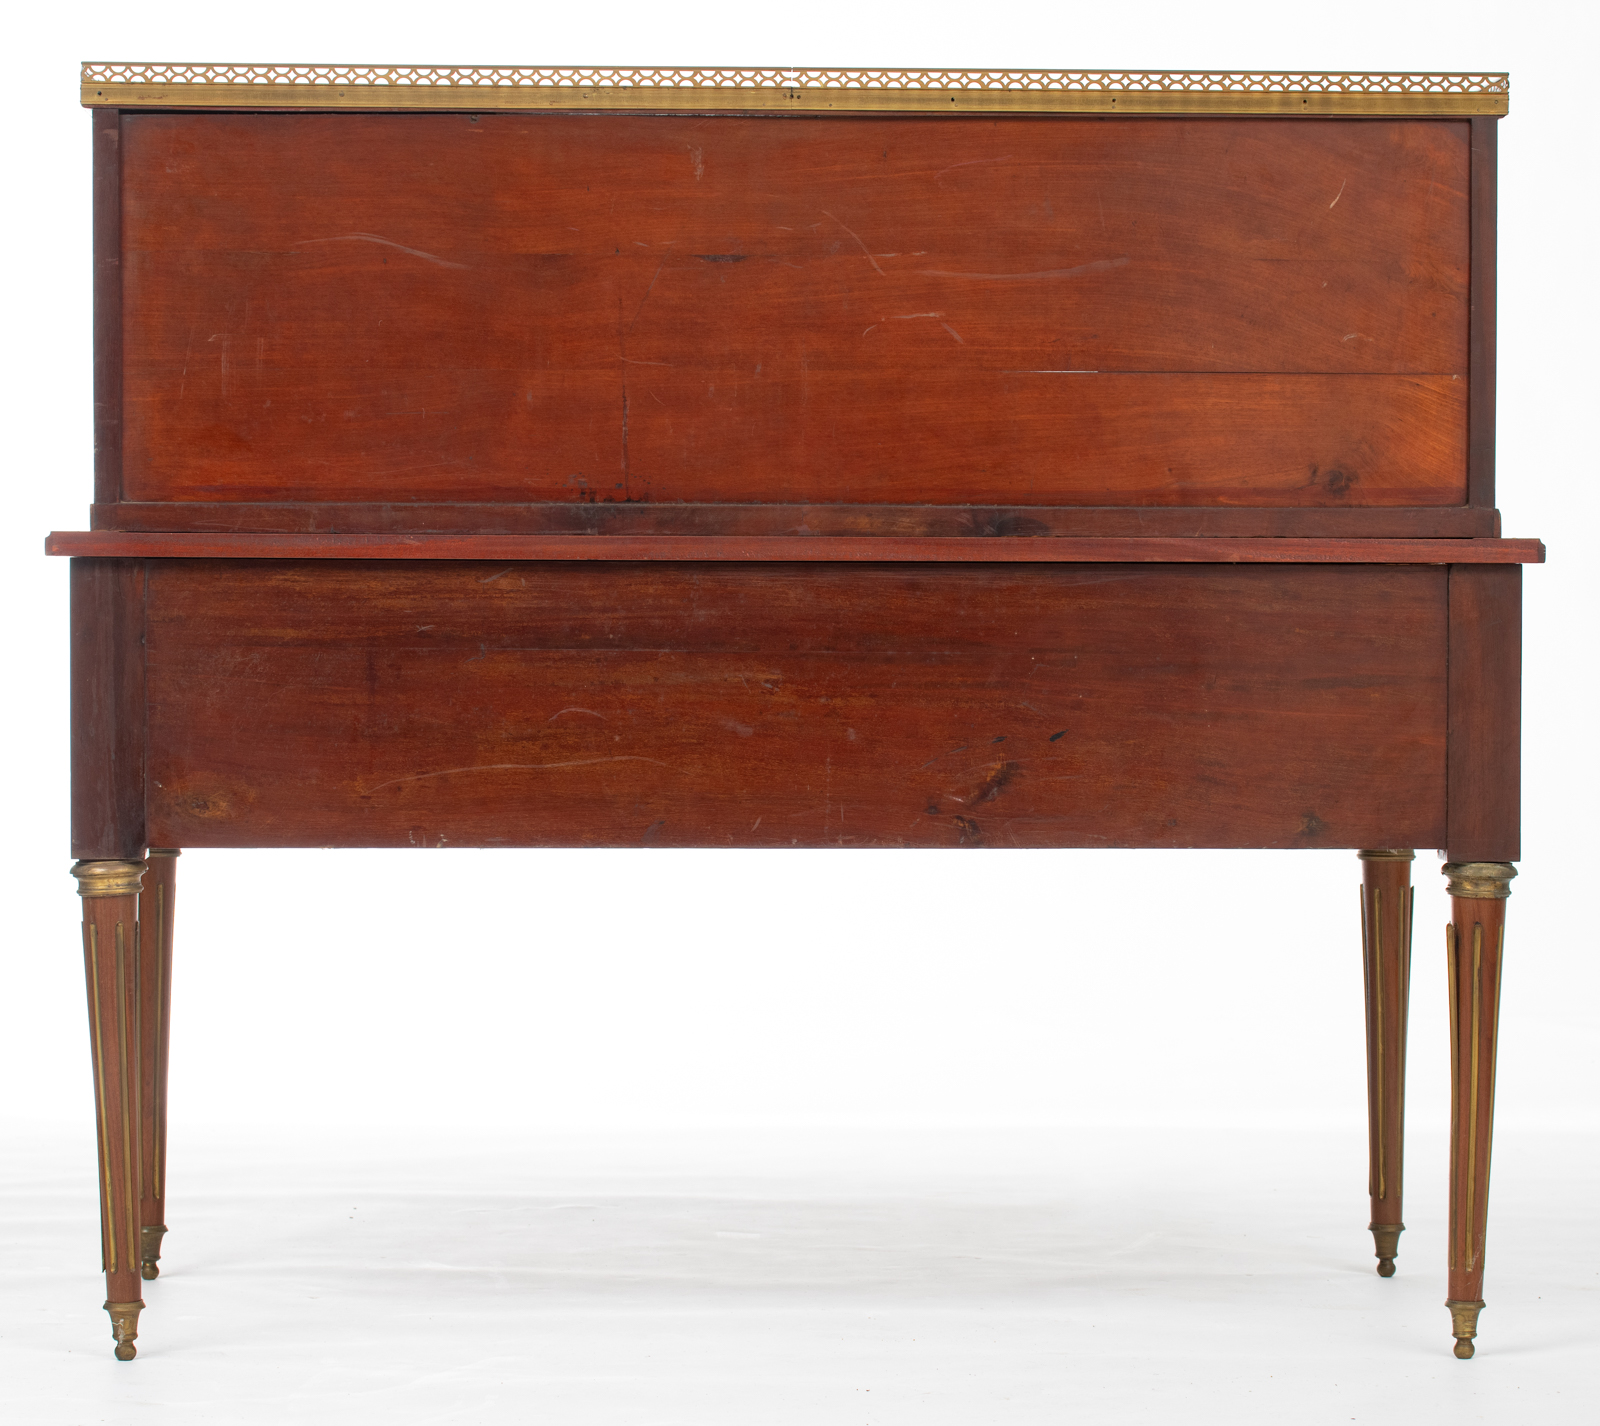 A Louis XVI style mahogany and rosewood 'bureau à gradin' with brass mounts and inlay banding, leath - Image 4 of 6